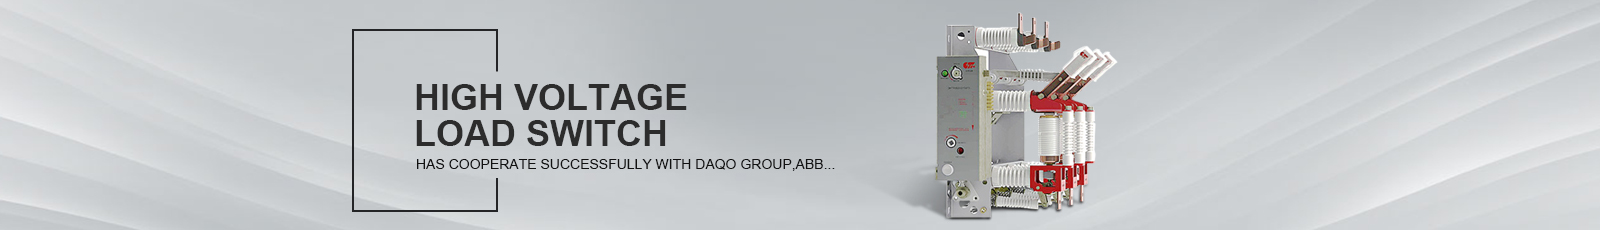 has cooperate successfully with daqo group，abb......